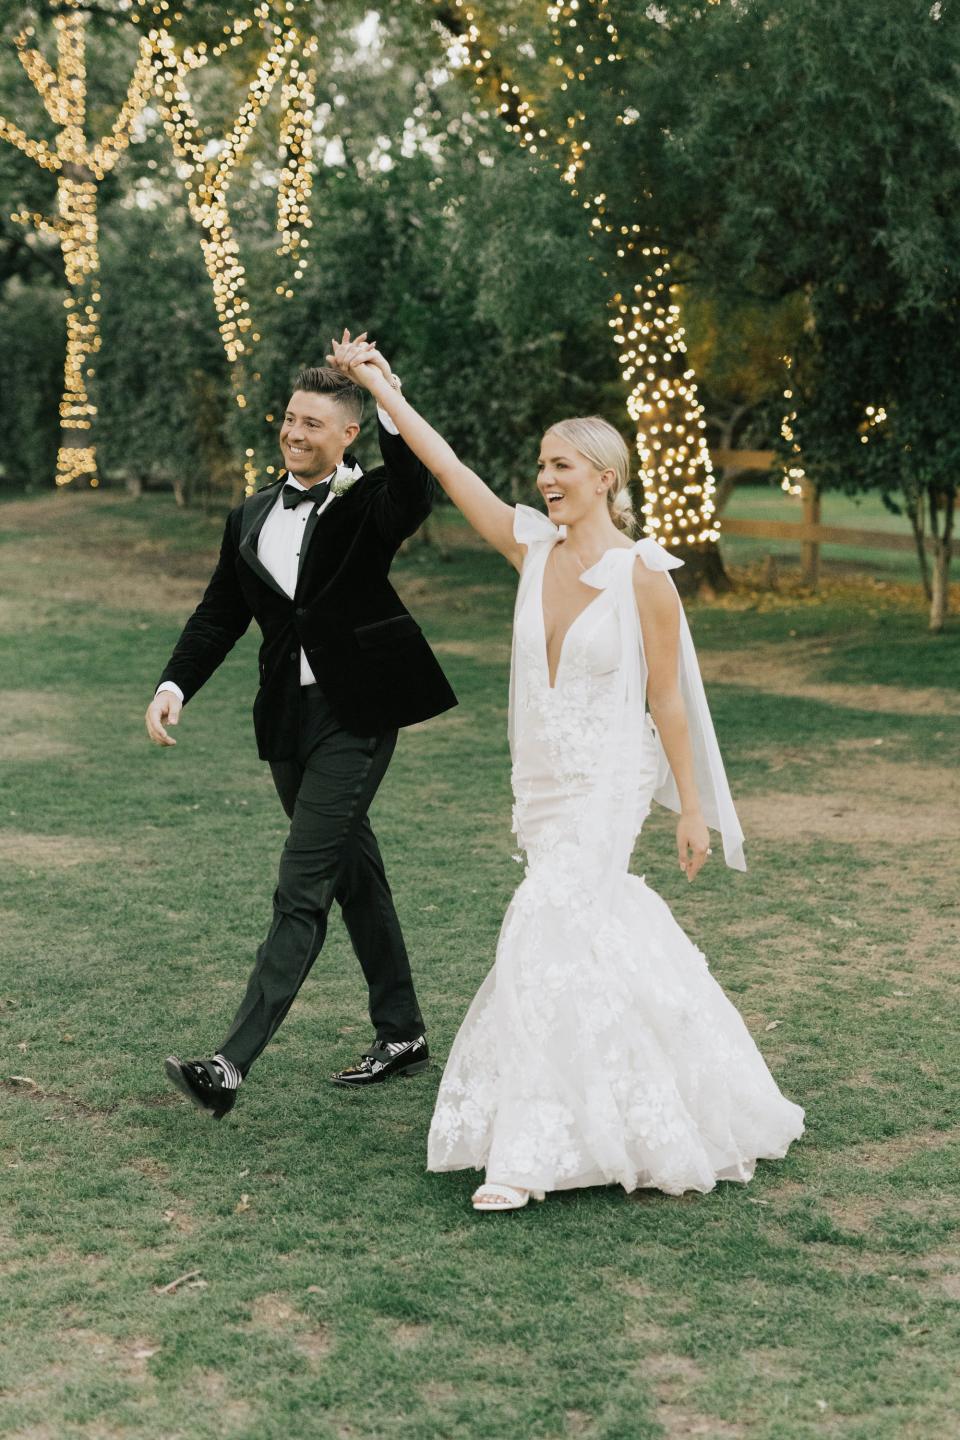 A bride and groom raise their hands and smile as they walk together.